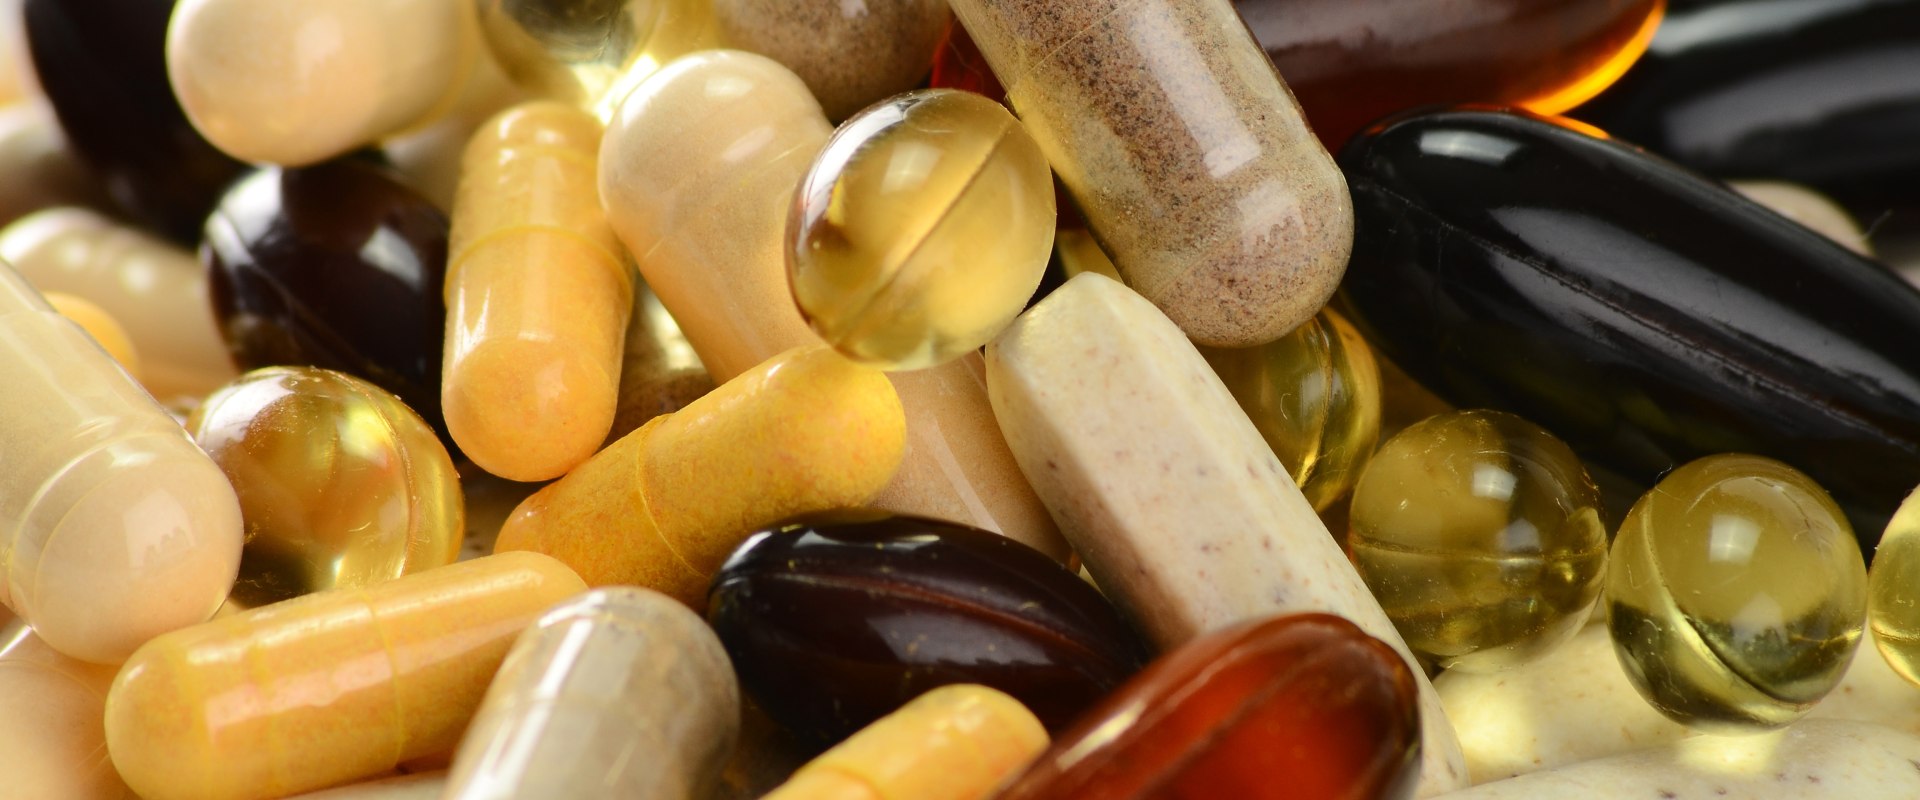 Are Nutritional Supplements Safe to Take? - A Comprehensive Guide